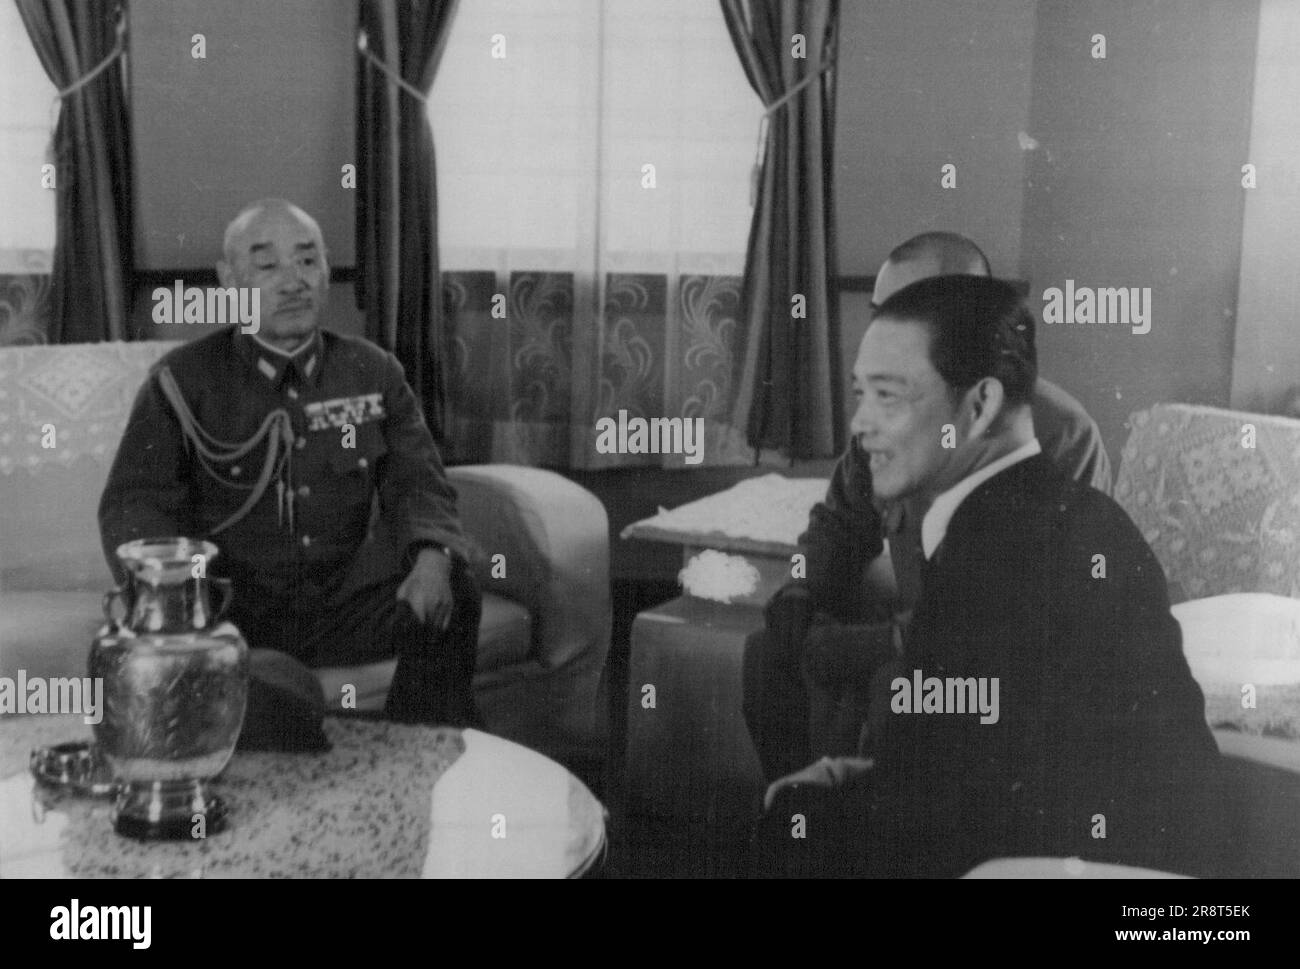 Tokyo... Sugiyama Returns from Naking.. General Gen. Sugiyama, chief of the Army Staff, who has been inspecting the battle fronts in China, during which he also conferred in Nanking with Mr. Wang Chingwei, right, returned to Tokyo today. November 6, 1940. (Photo by The Domei News Photos Service). Stock Photo